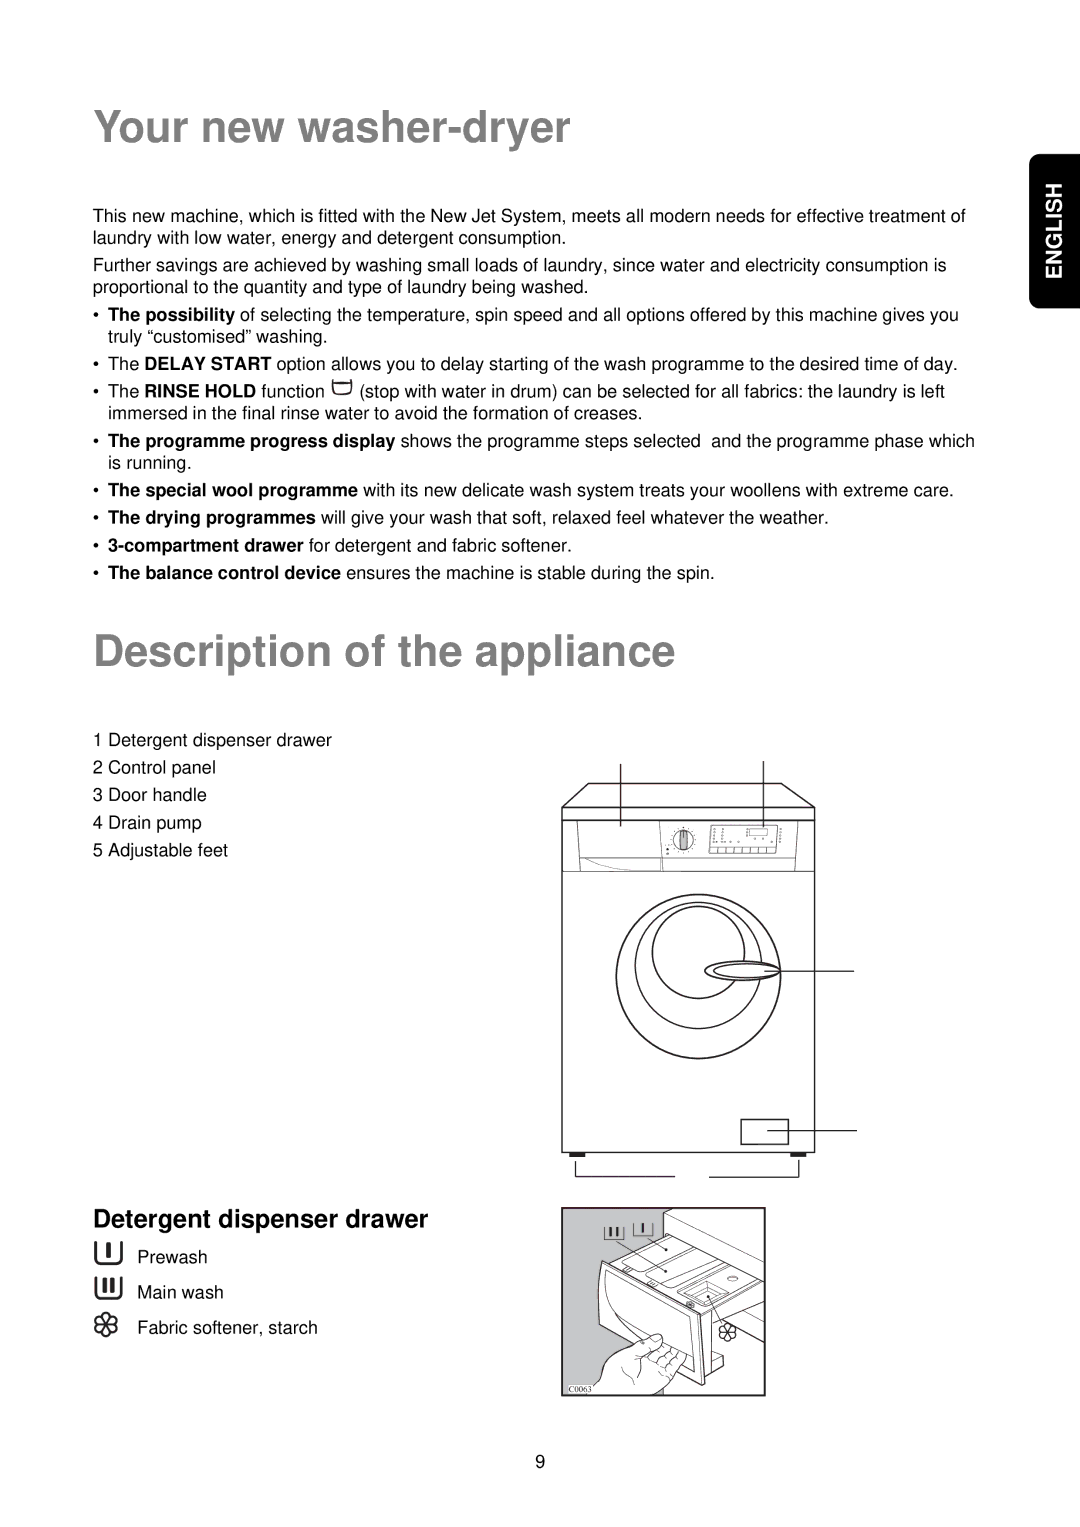 Electrolux EWW 1292 manual Your new washer-dryer, Description of the appliance, Detergent dispenser drawer 